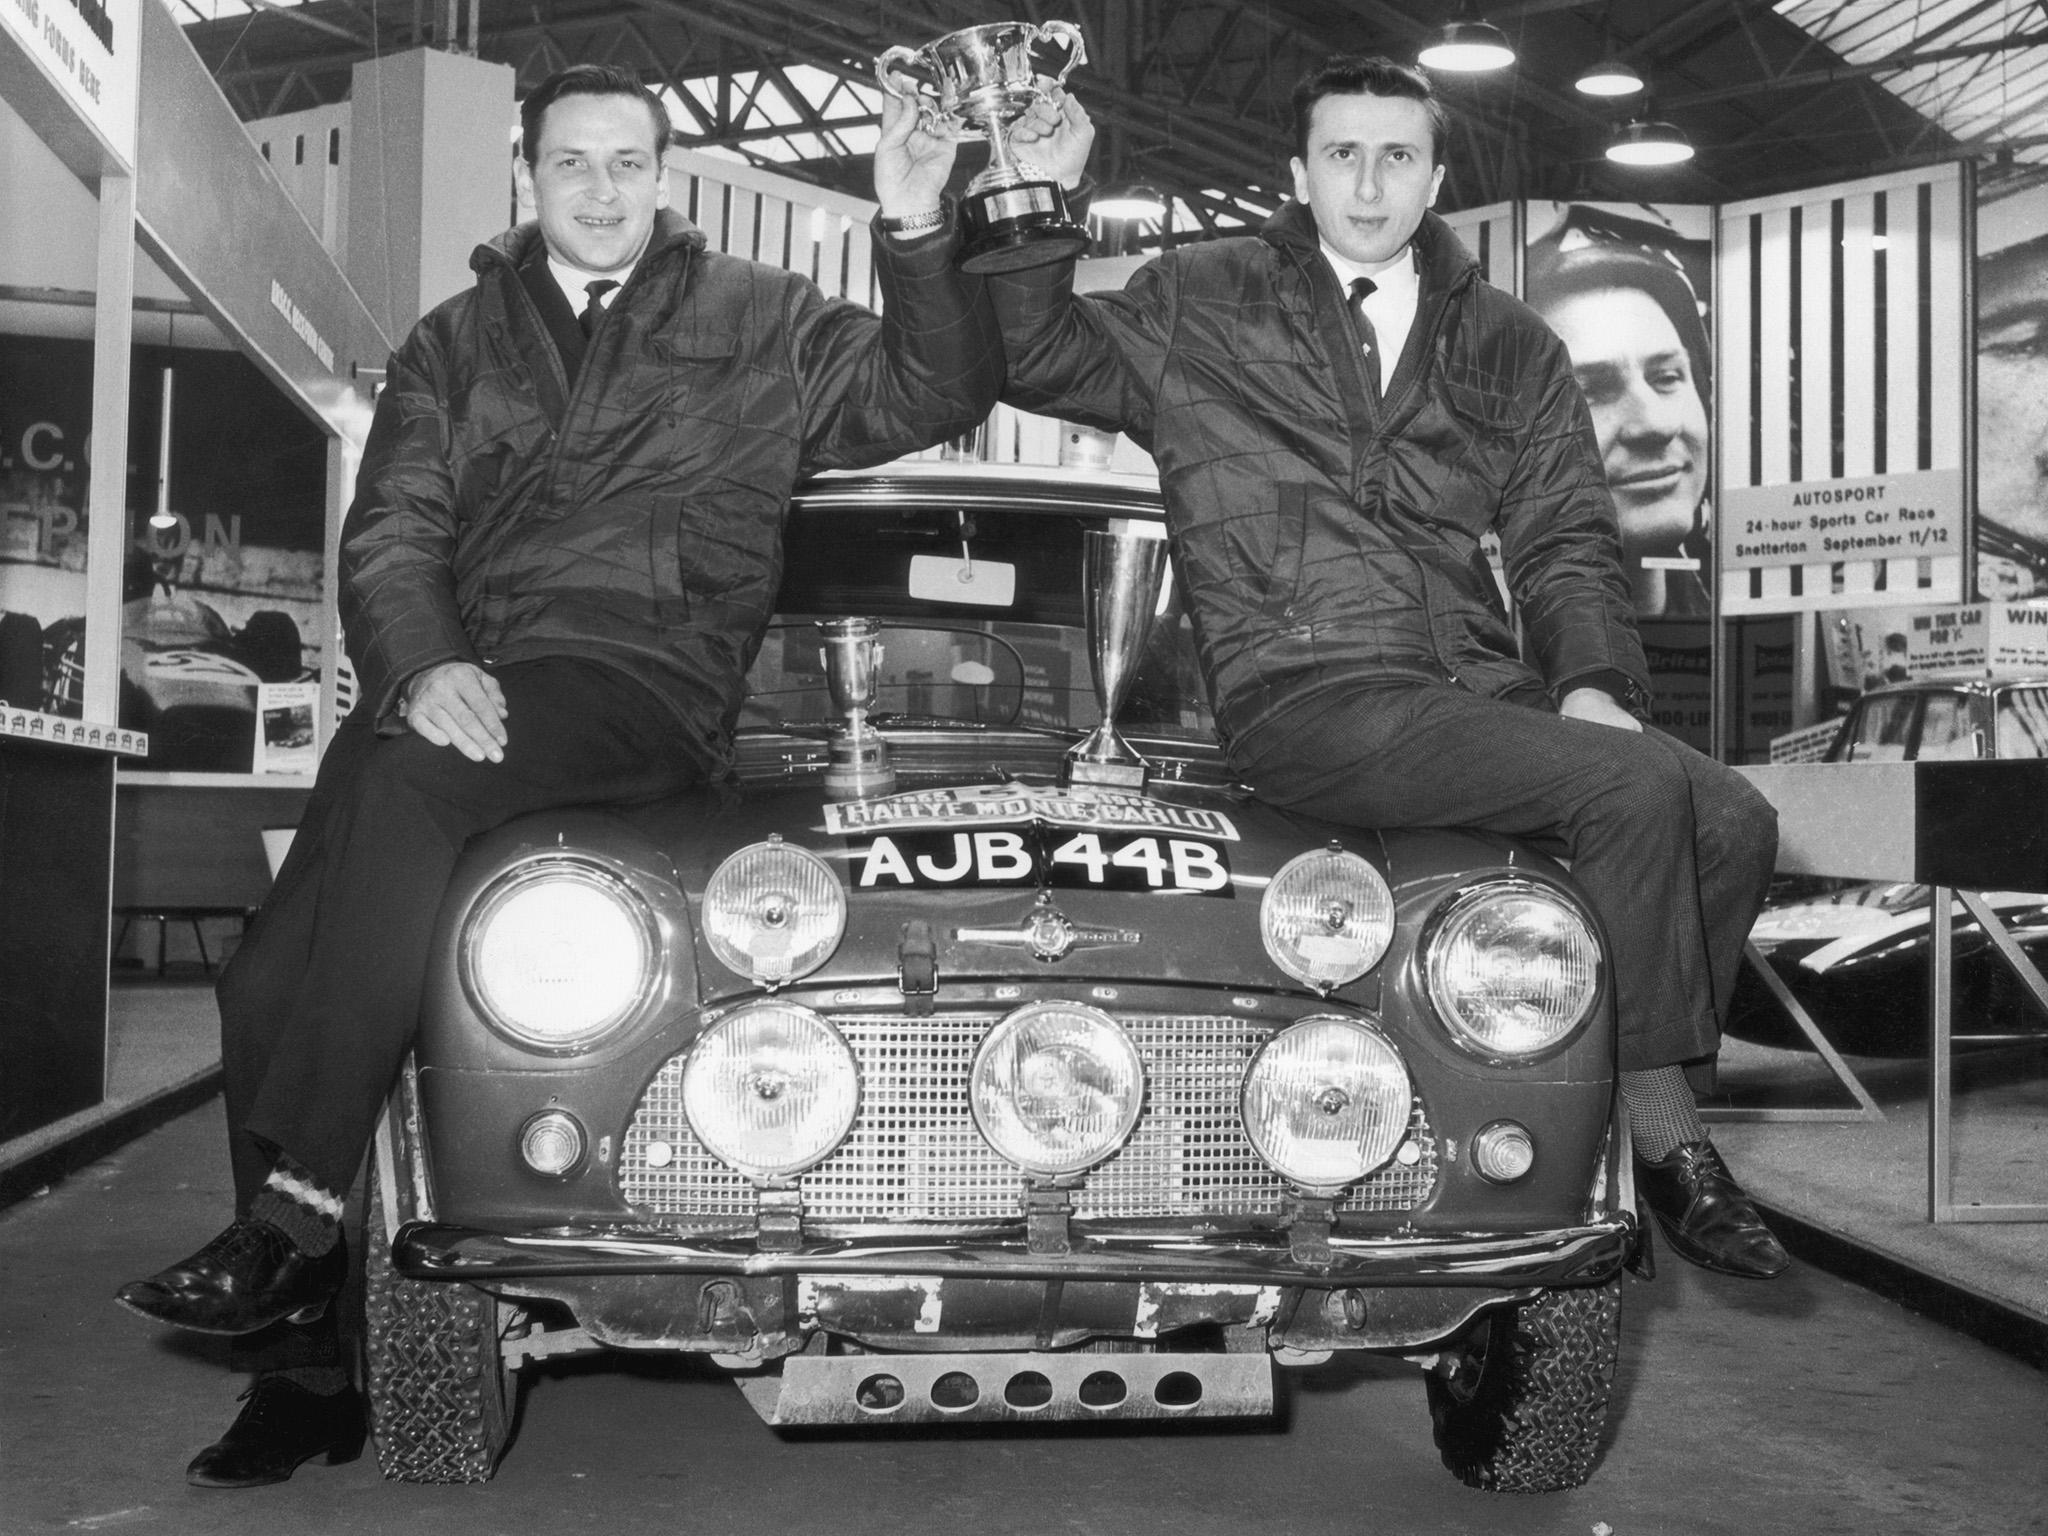 &#13;
Makinen (left) and his co-driver Paul Easter hold up their trophy in London after winning the 1965 Monte Carlo Rally &#13;